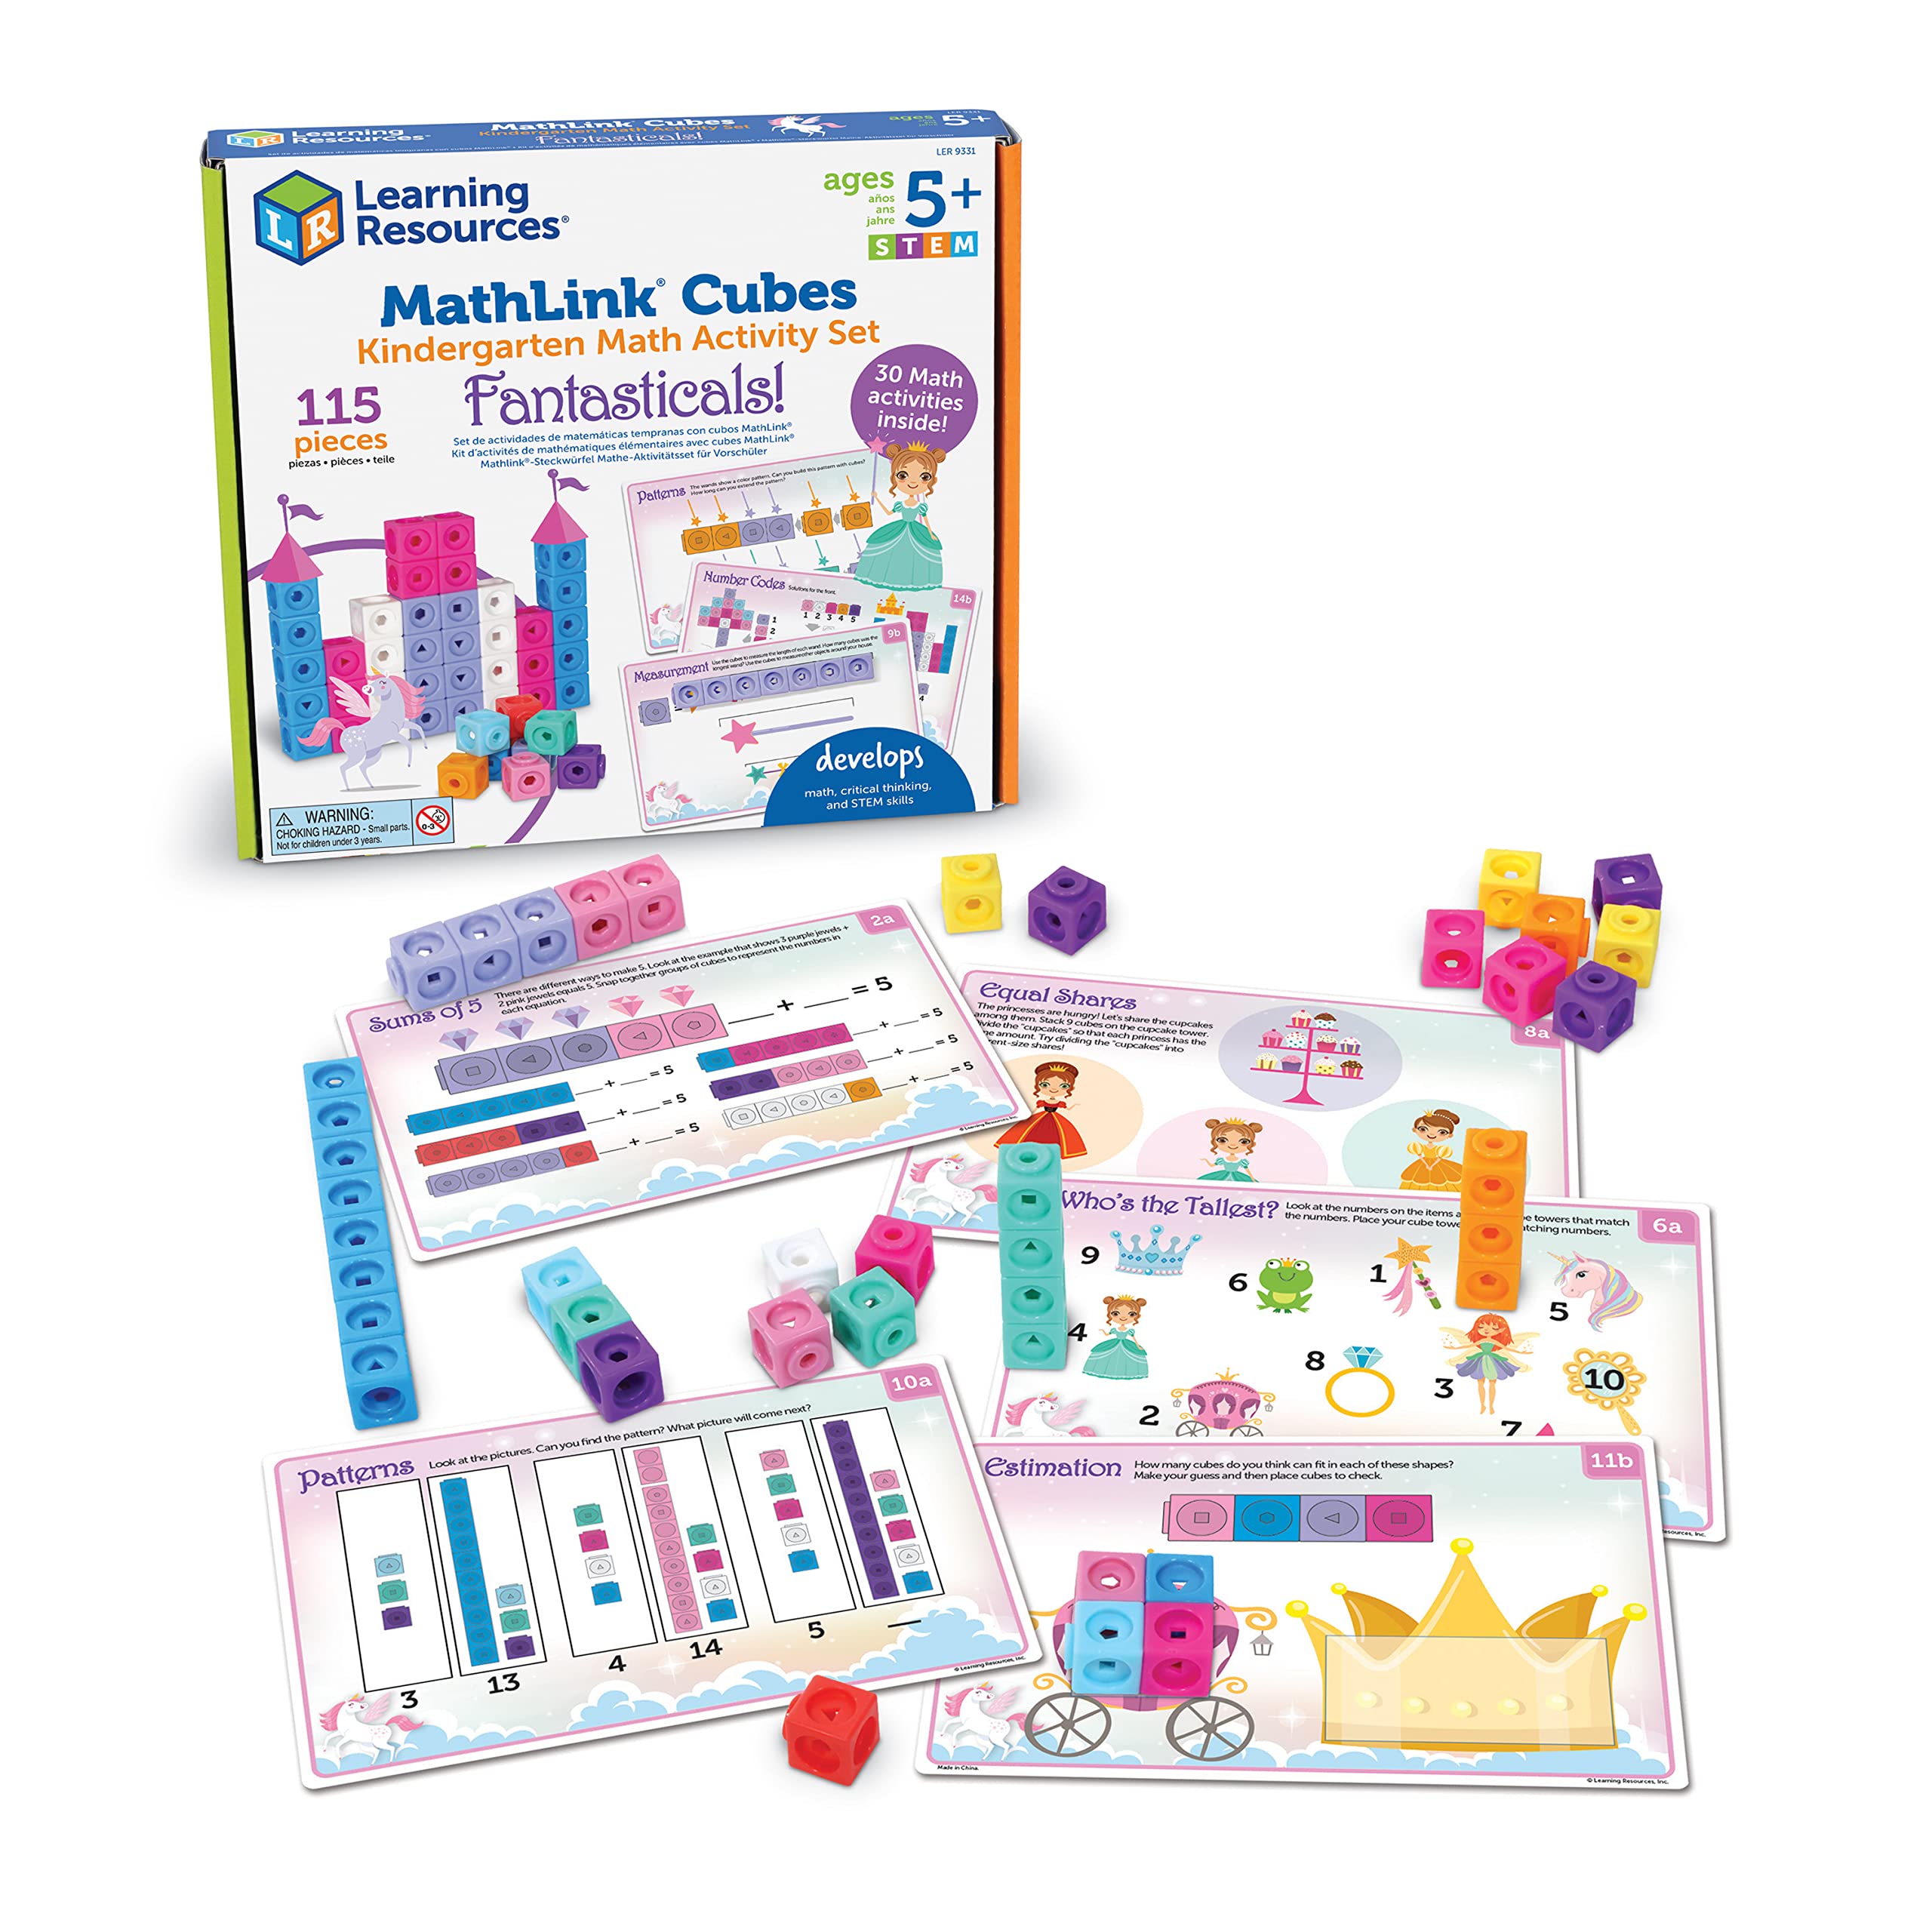 115-Piece Learning Resources MathLink Cubes Fantasticals Kindergarten Math Activity Set $5 + Free S&H w/ Prime or orders $25+ ~ Amazon